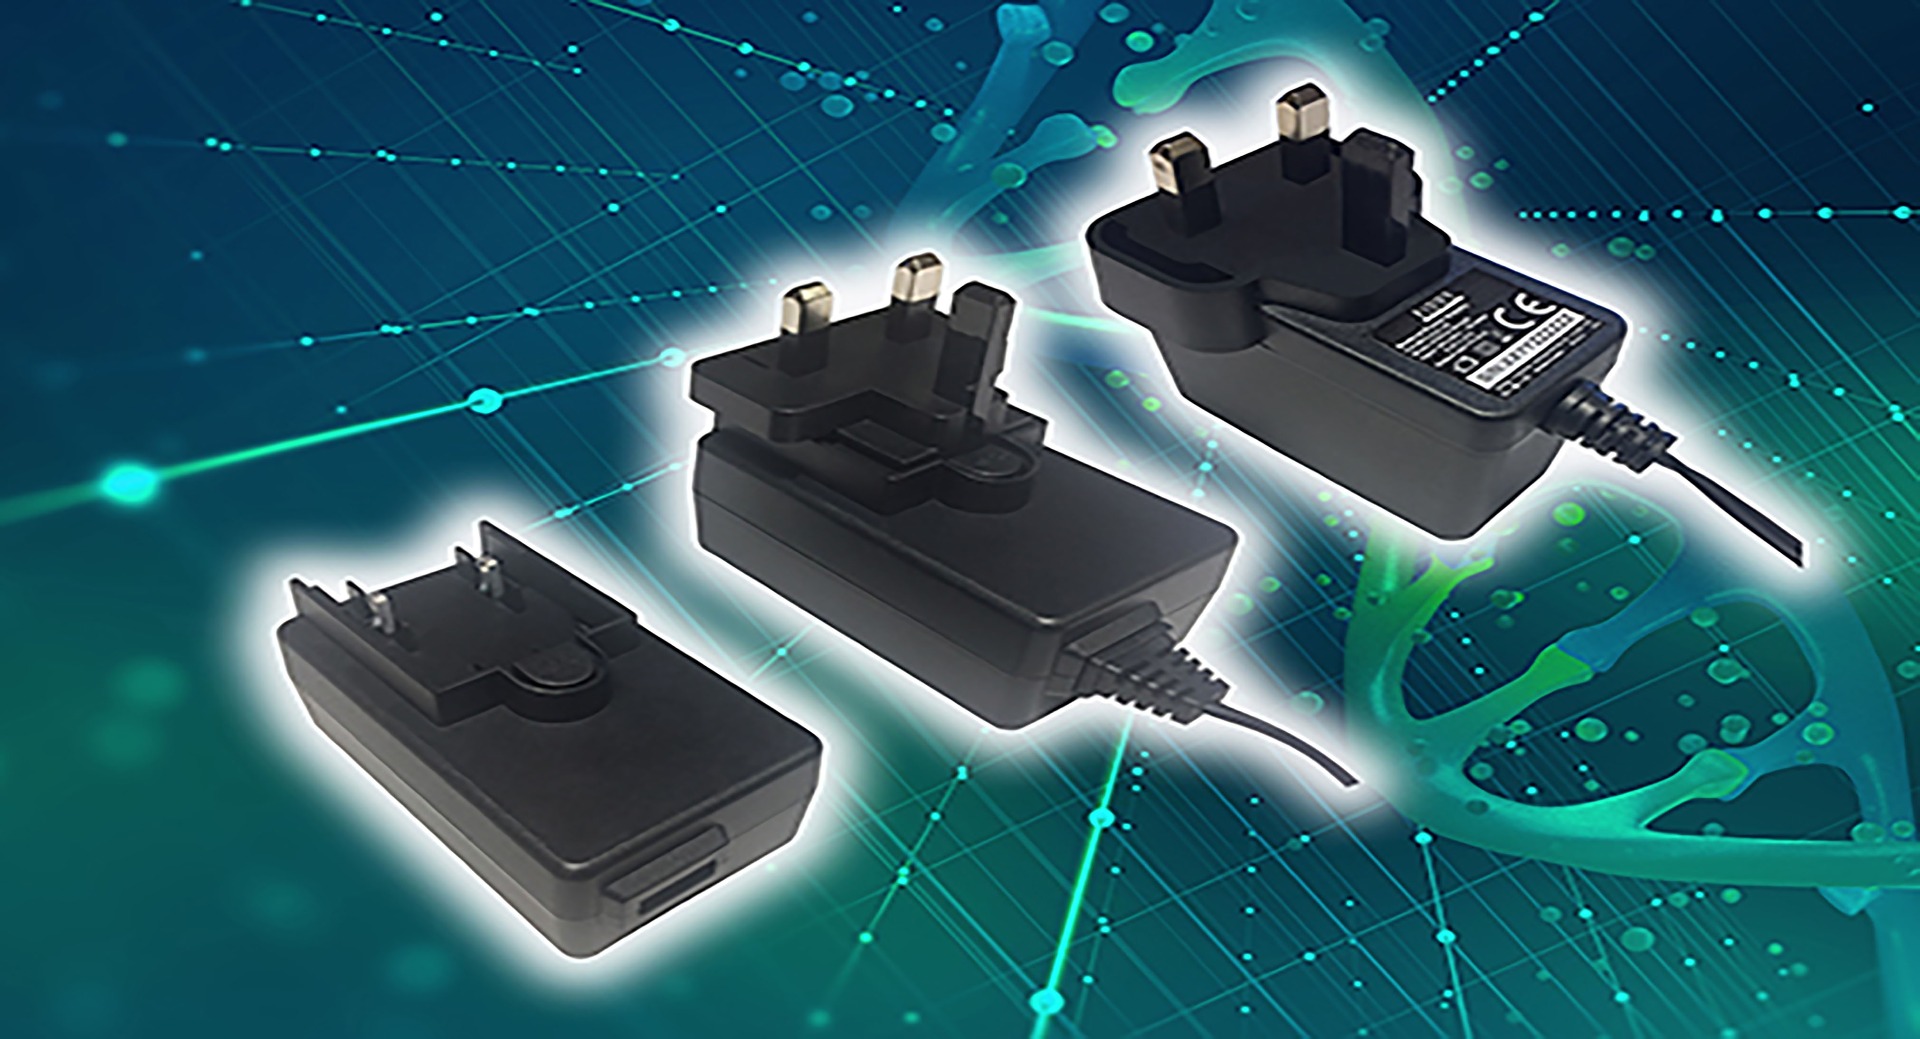 New medical plug-top power supplies help healthcare system designers stay compliant and under budget